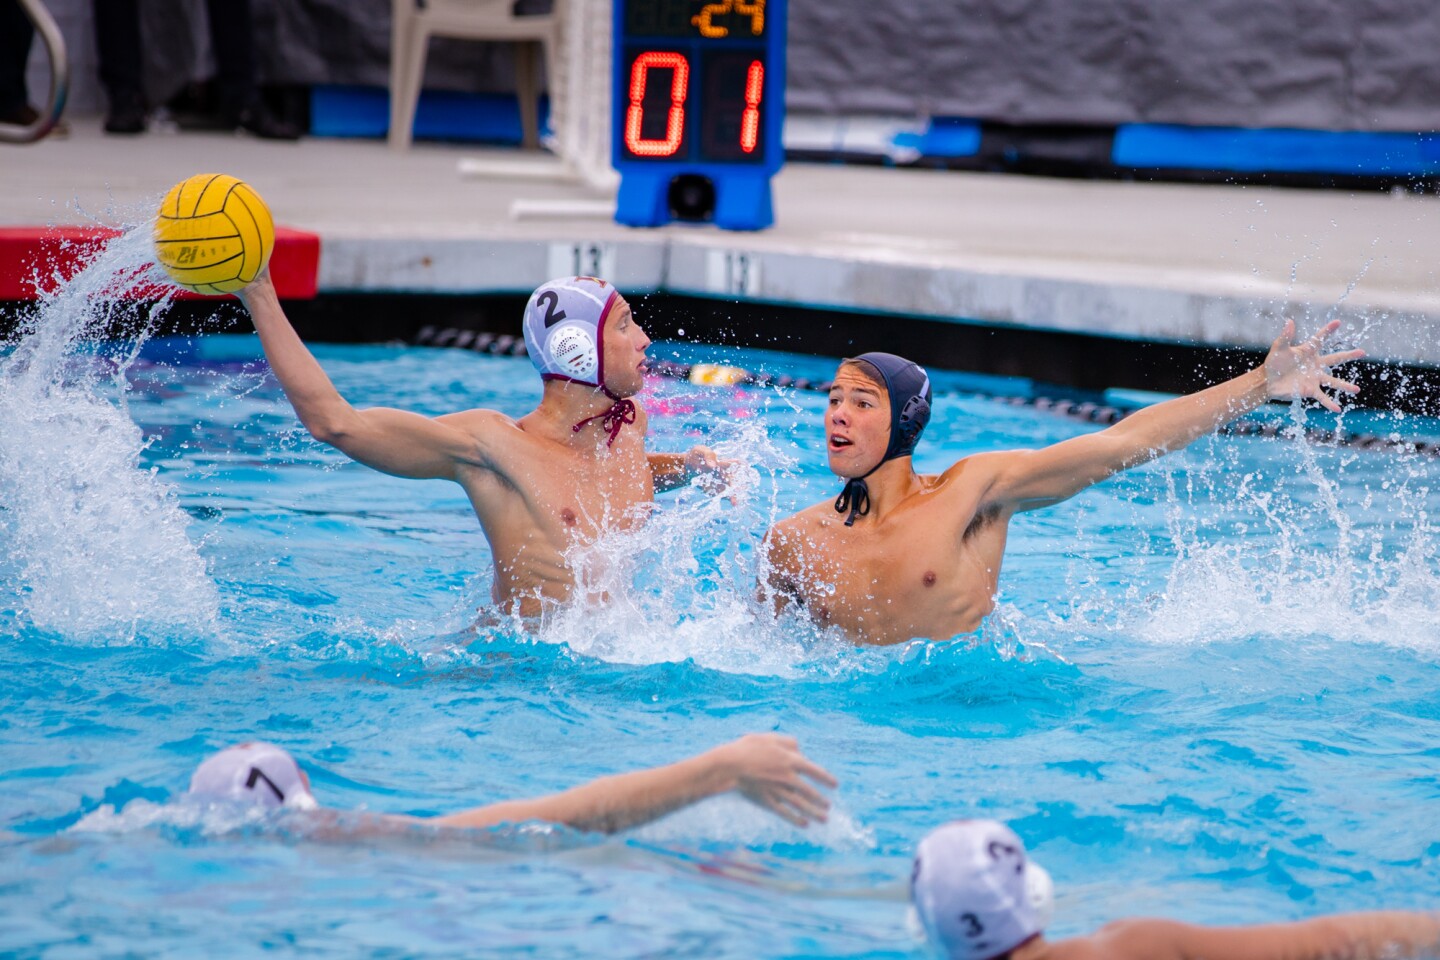 Zach Fales (2) shoots for The Bishop's School as La Jolla High's Crusoe Frapwell defends in Bishop's 13-9 water polo win.